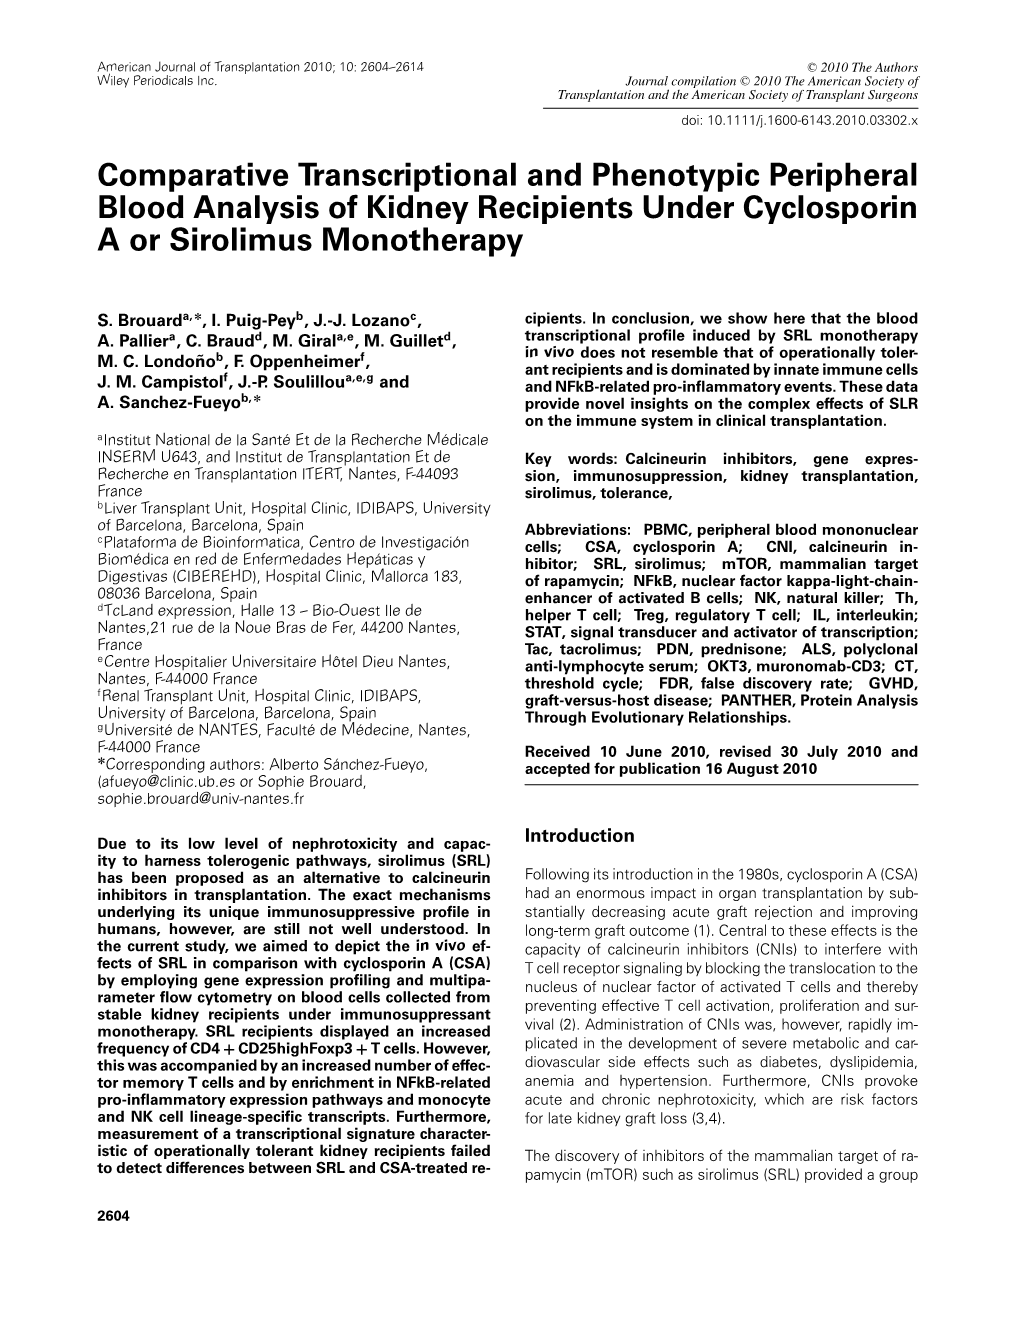 Comparative Transcriptional and Phenotypic Peripheral Blood Analysis of Kidney Recipients Under Cyclosporin a Or Sirolimus Monotherapy